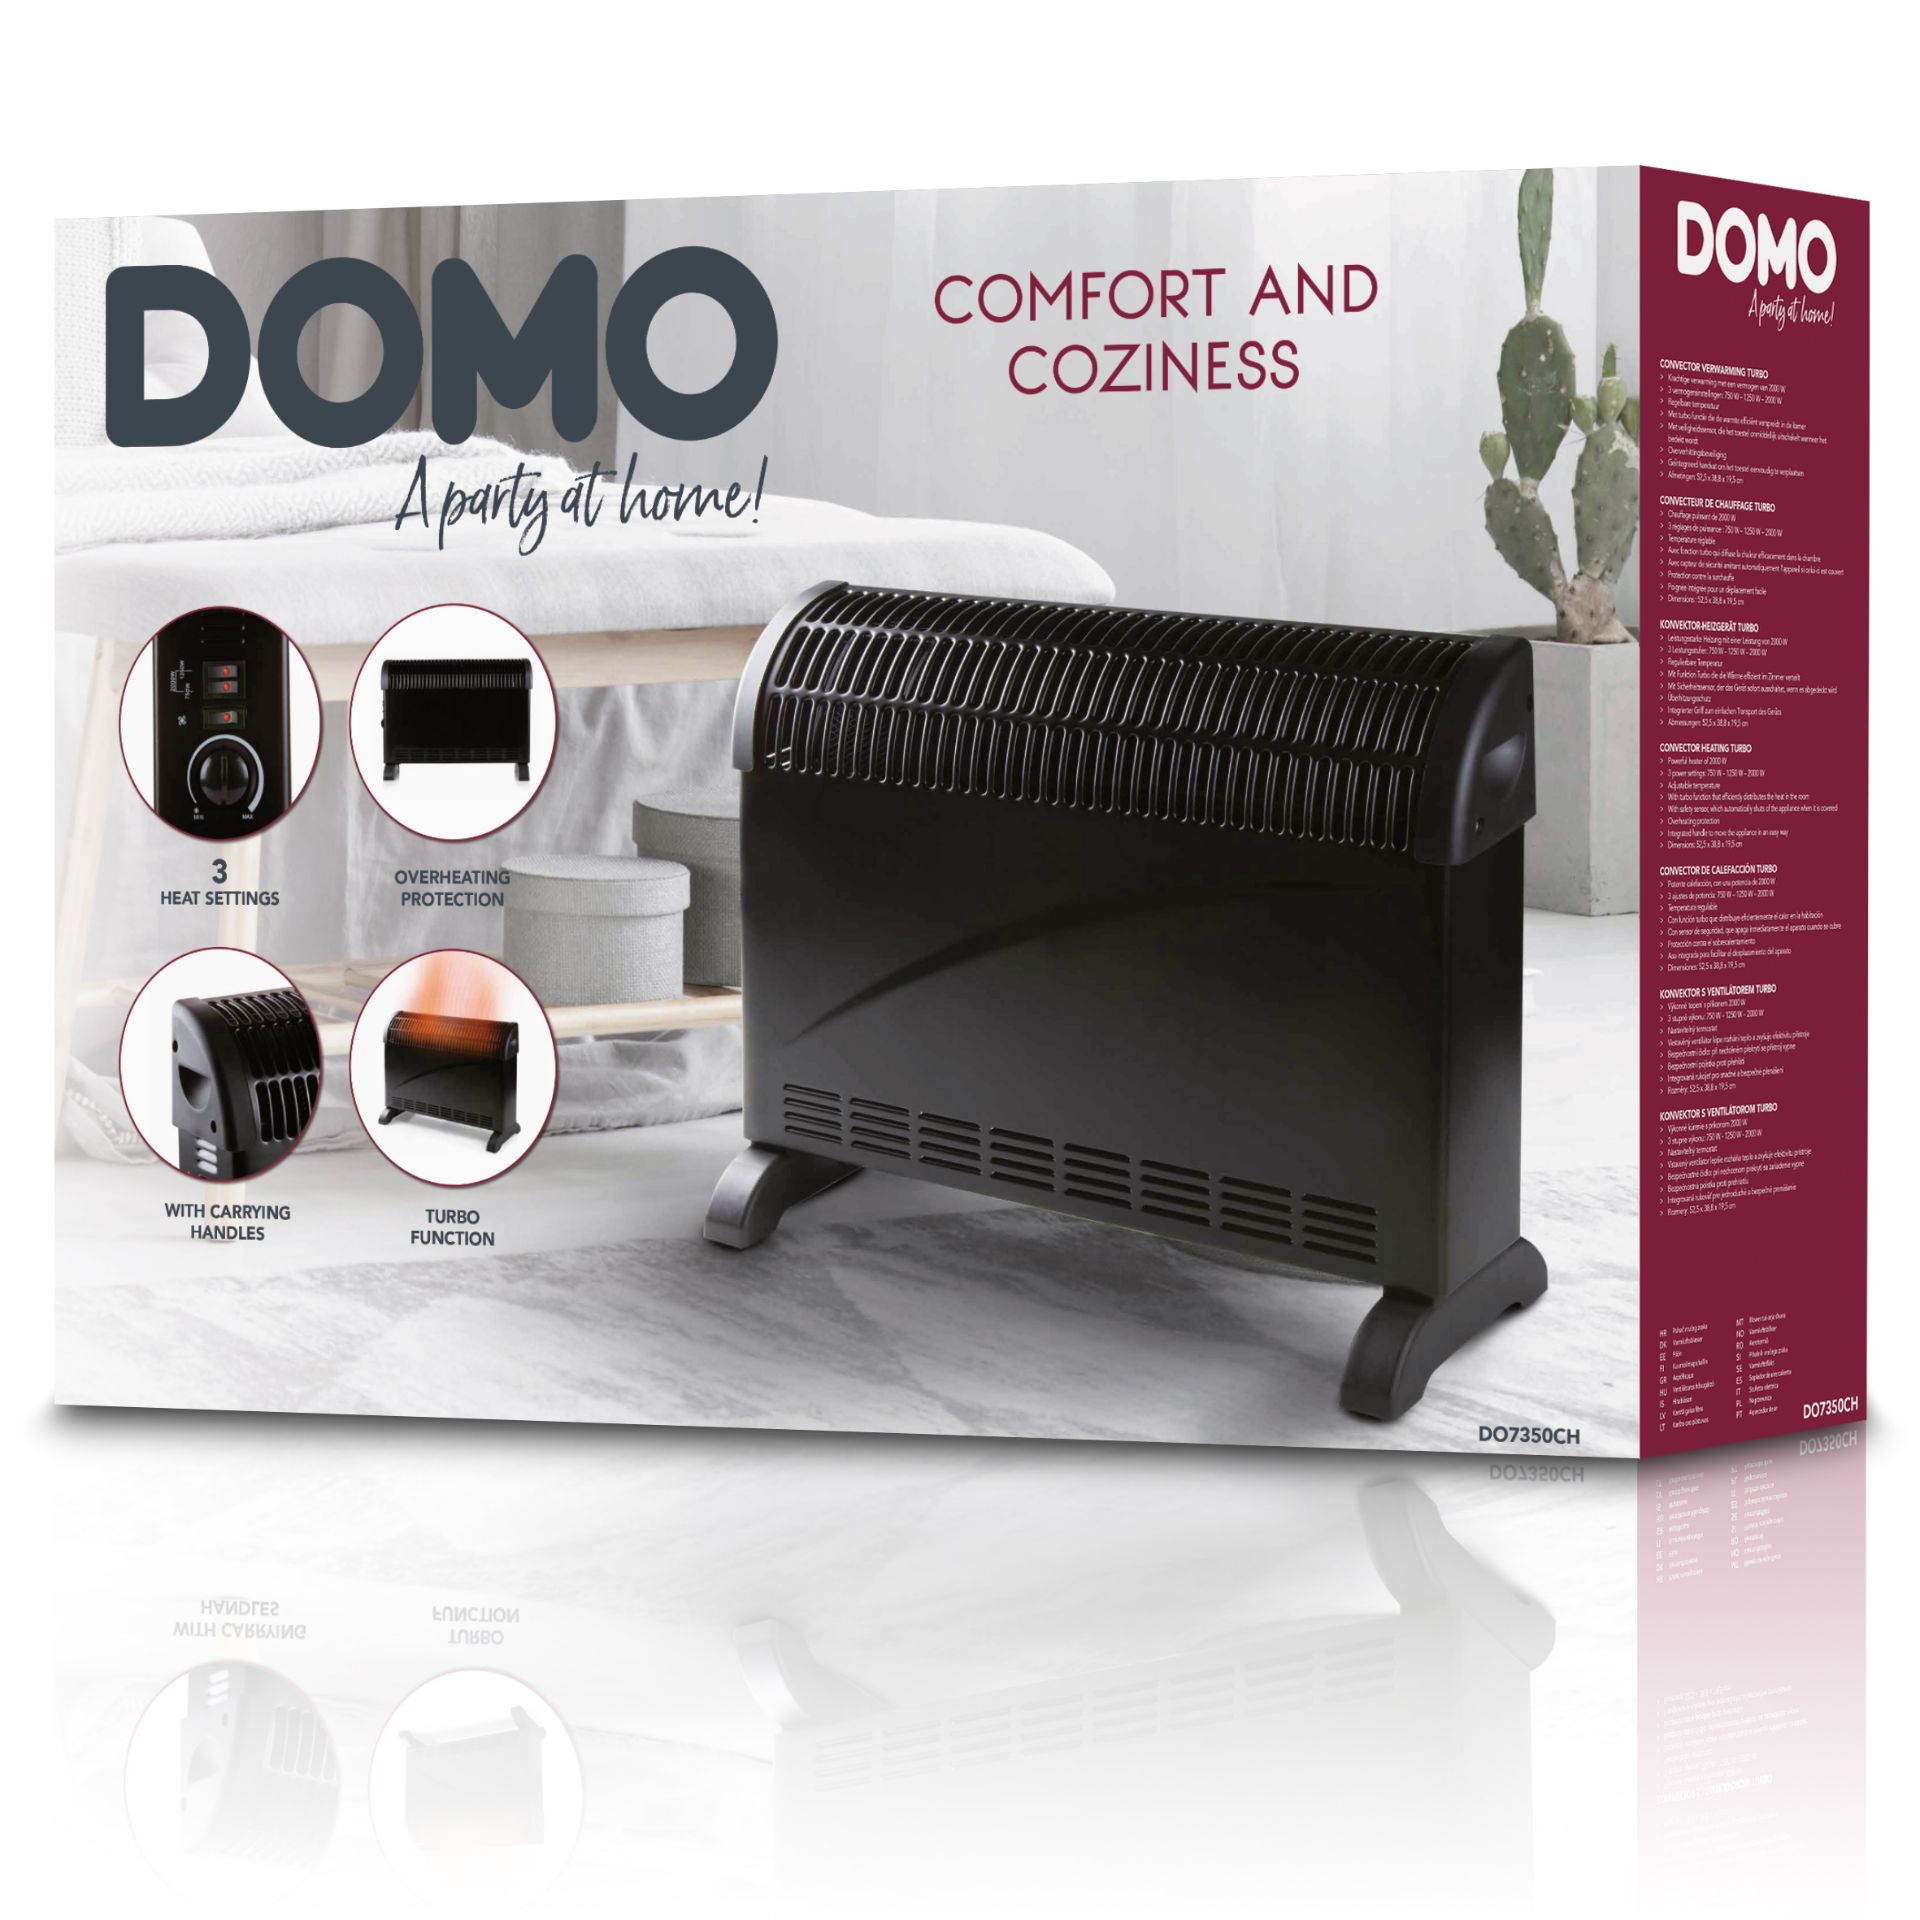 5 x DOMO Convector Heater Turbo 2000W RRP £ 55 each - Image 3 of 8